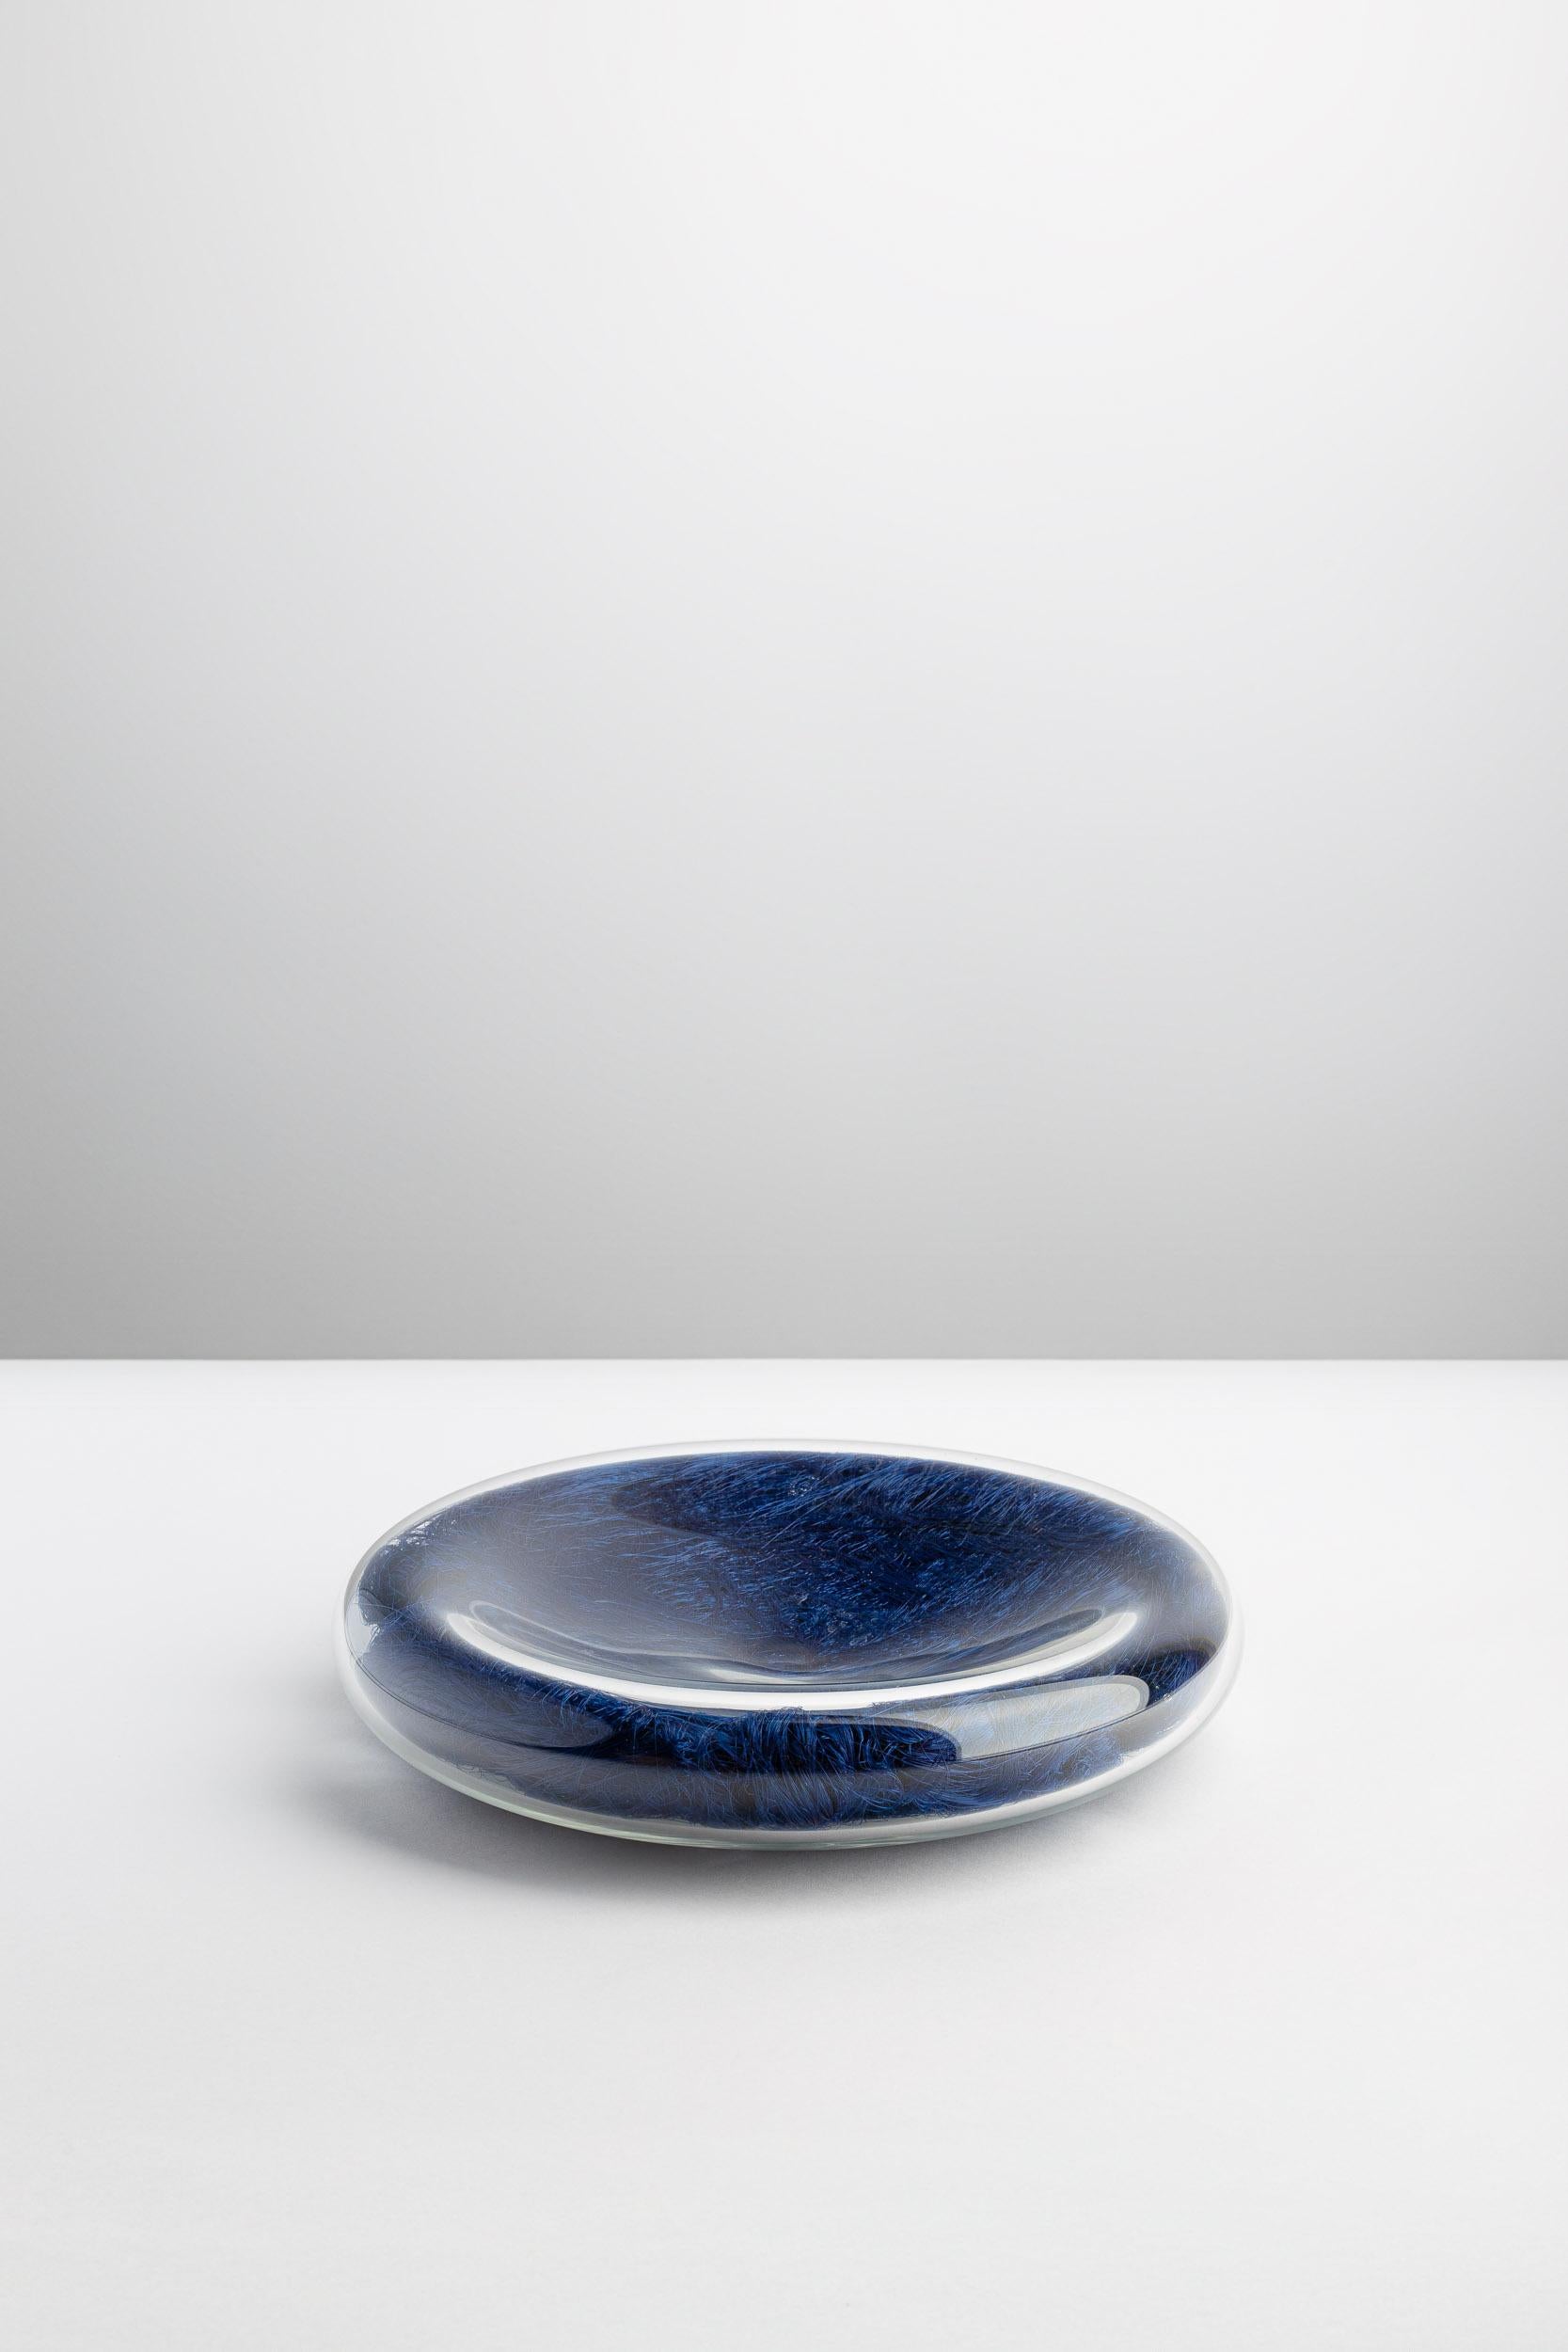 VELENI’s communicative and elegant Centerpiece CE-20db is a vanitas leading to reflection. This blown glass disc filled with microfibers catches the eye, making it wander among volumes, transparencies and roundness. However, why not see it as a